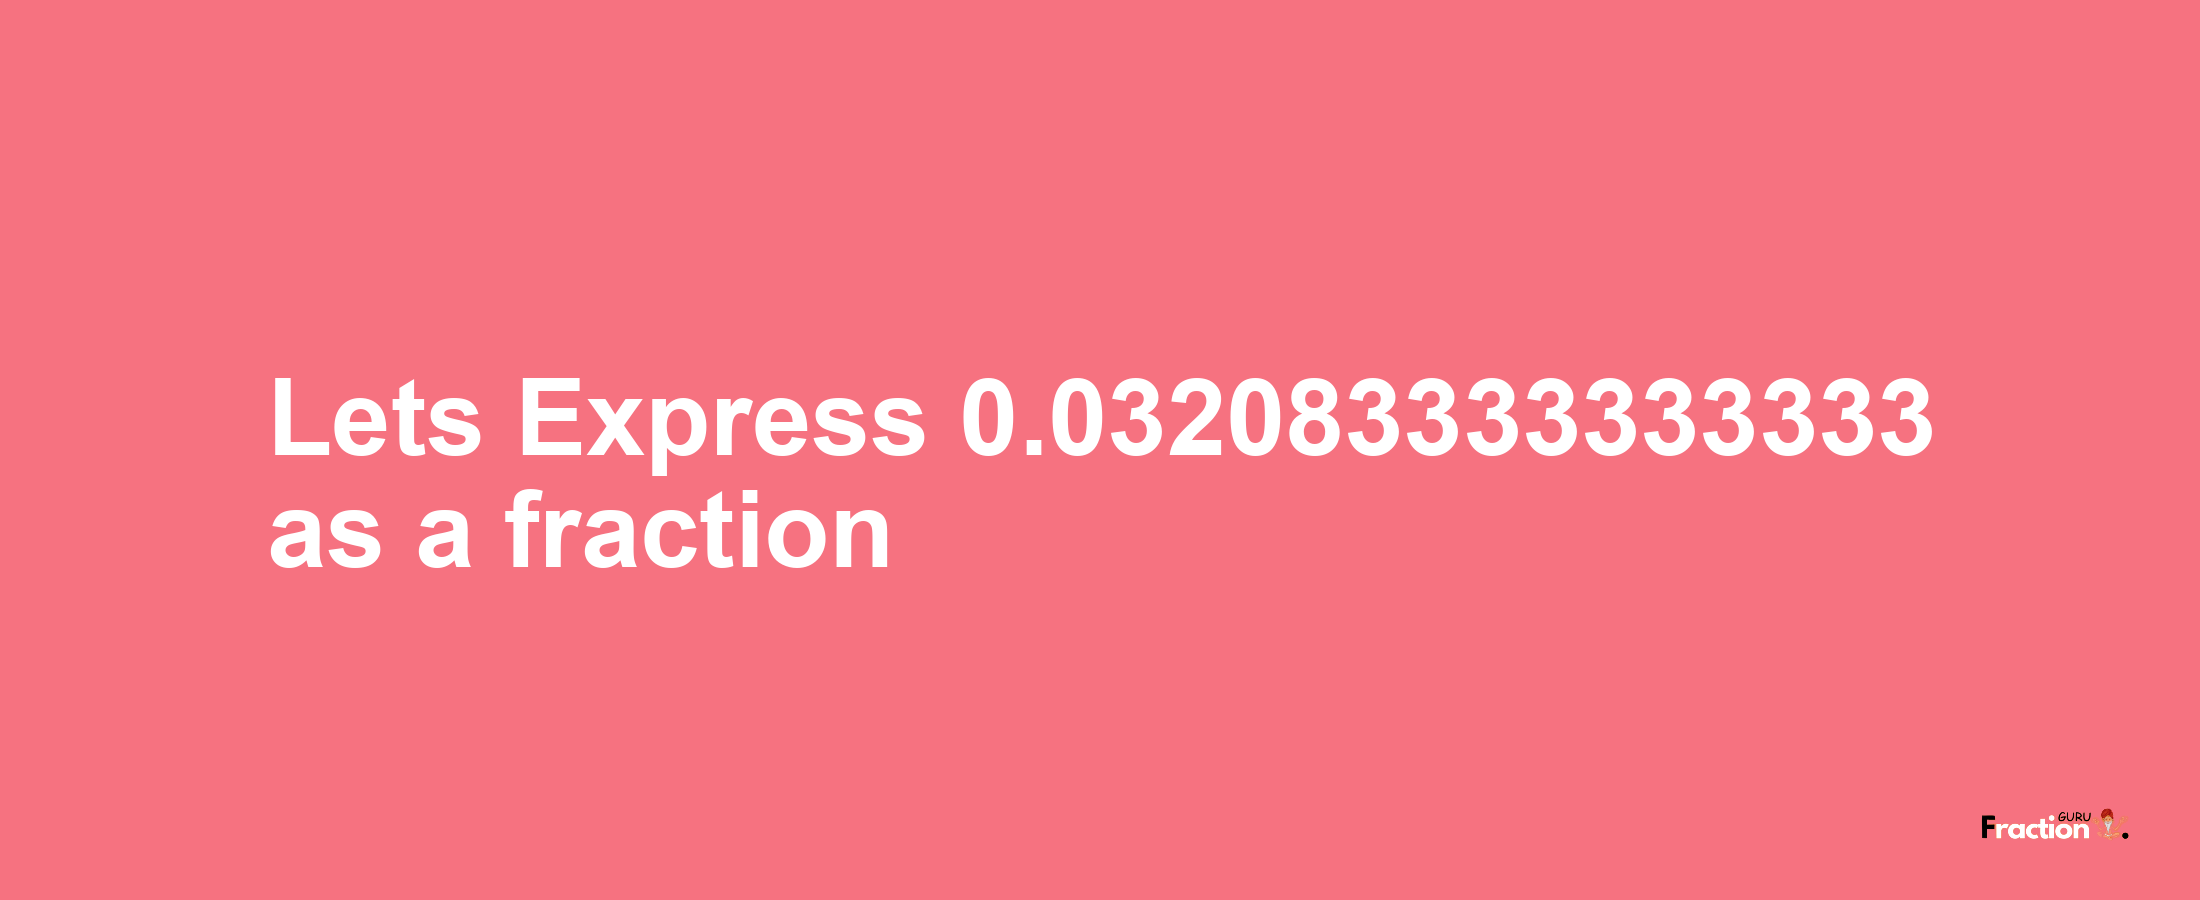 Lets Express 0.032083333333333 as afraction